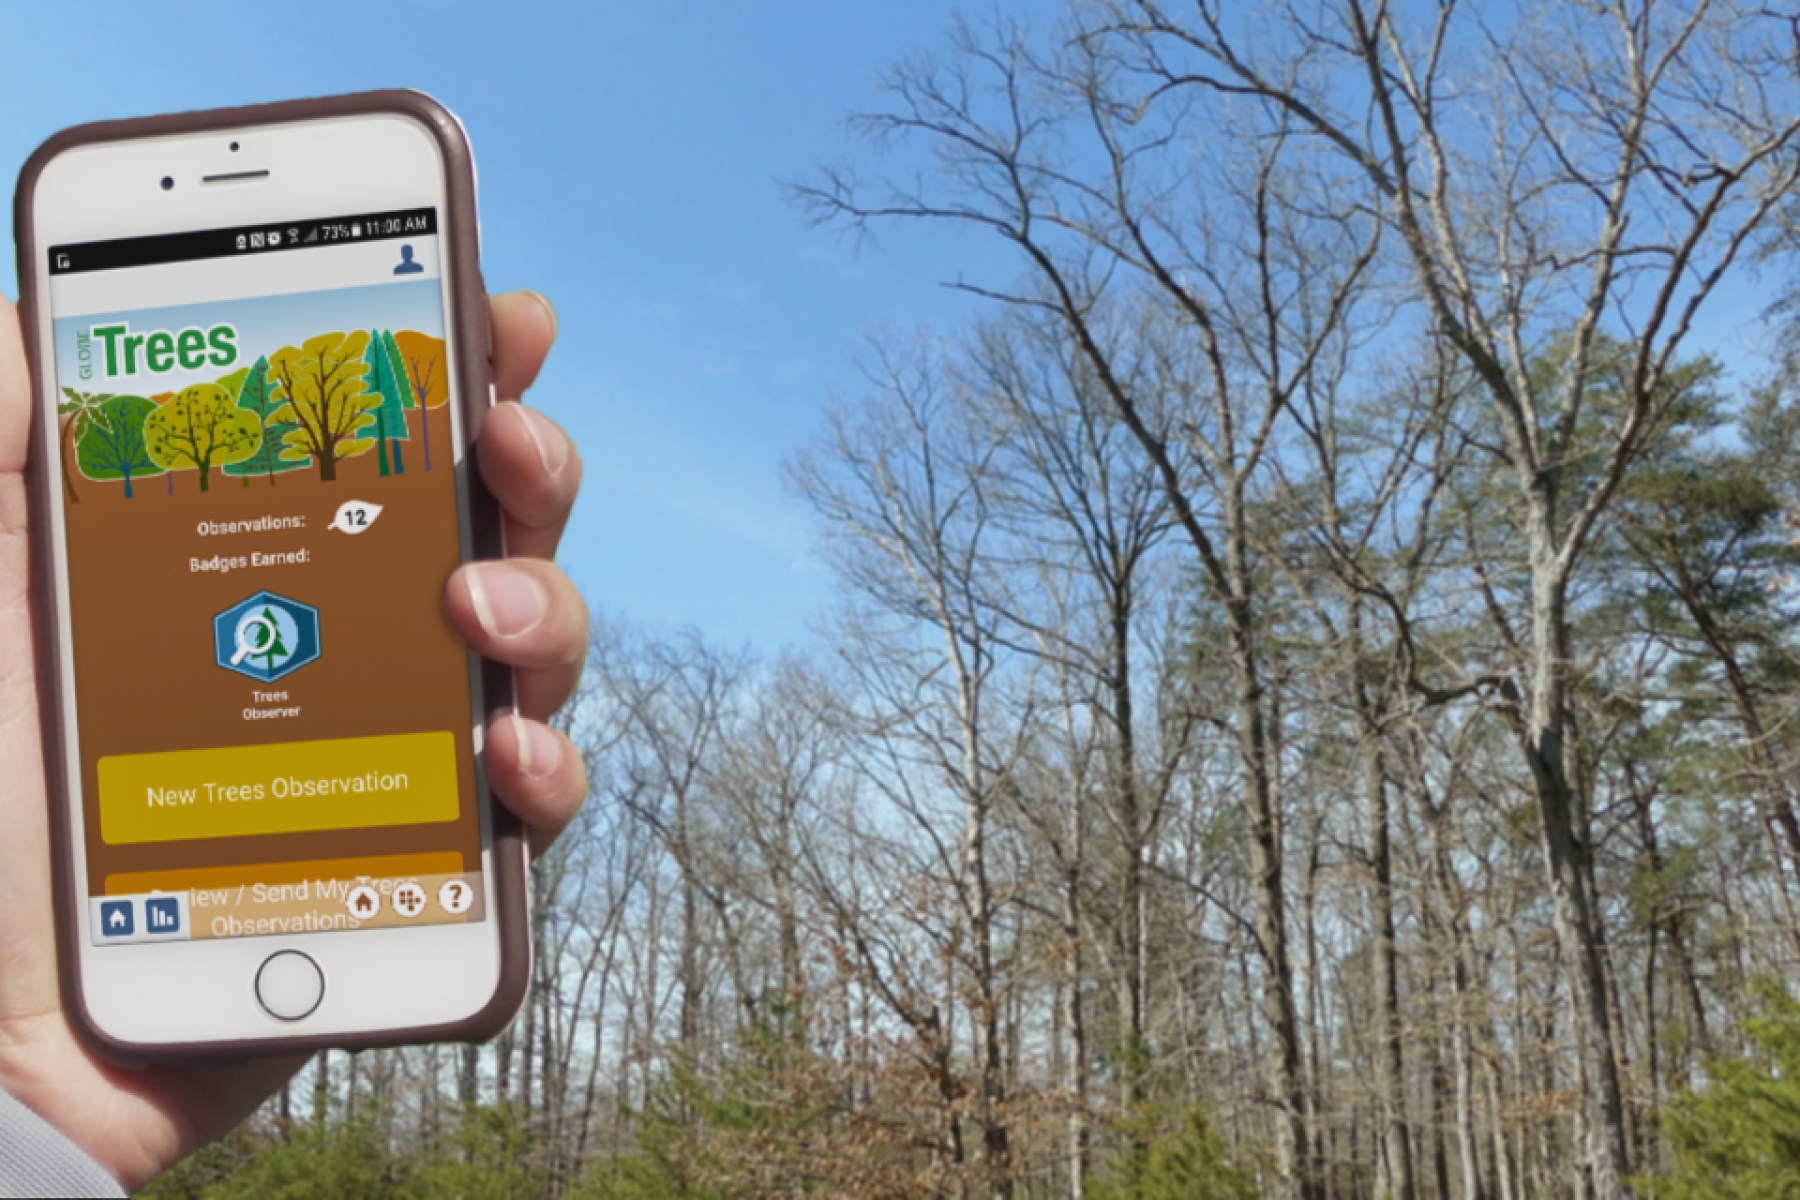 A person holding a phone taking a picture of a tree for a citizen science app